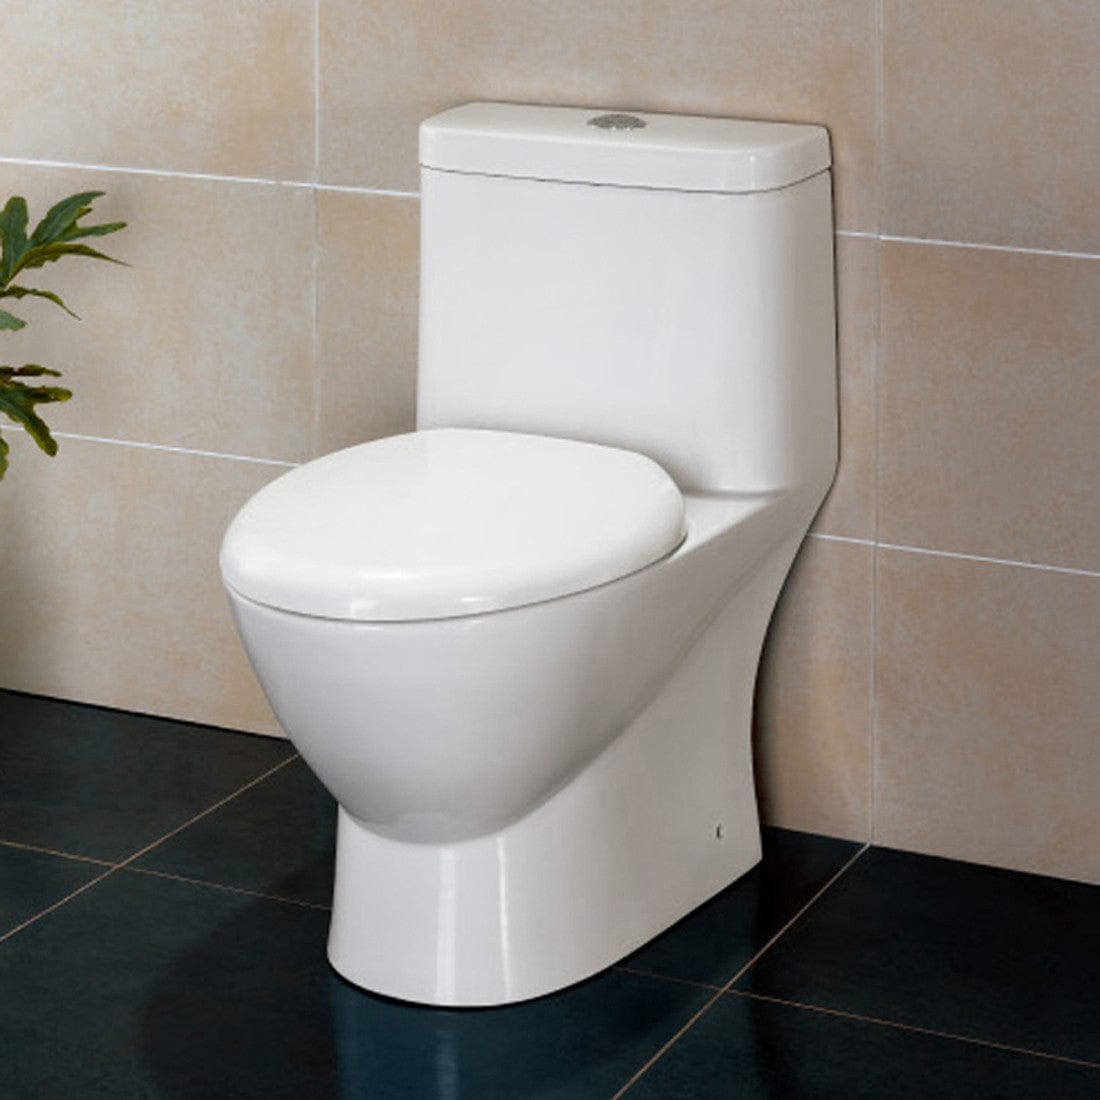 This Ariel Royal toilet will add a contemporary and European flavor to your bathroom remodel. In addition to its unique appearance, this toilet has a dual flush for a full flush (1.6 gpf) and a half flush (0.8 gpf). It is constructed out of one piece and the flush is located at the center push button. Additionally, the porcelain is finished with a high quality, stain resistant glaze.